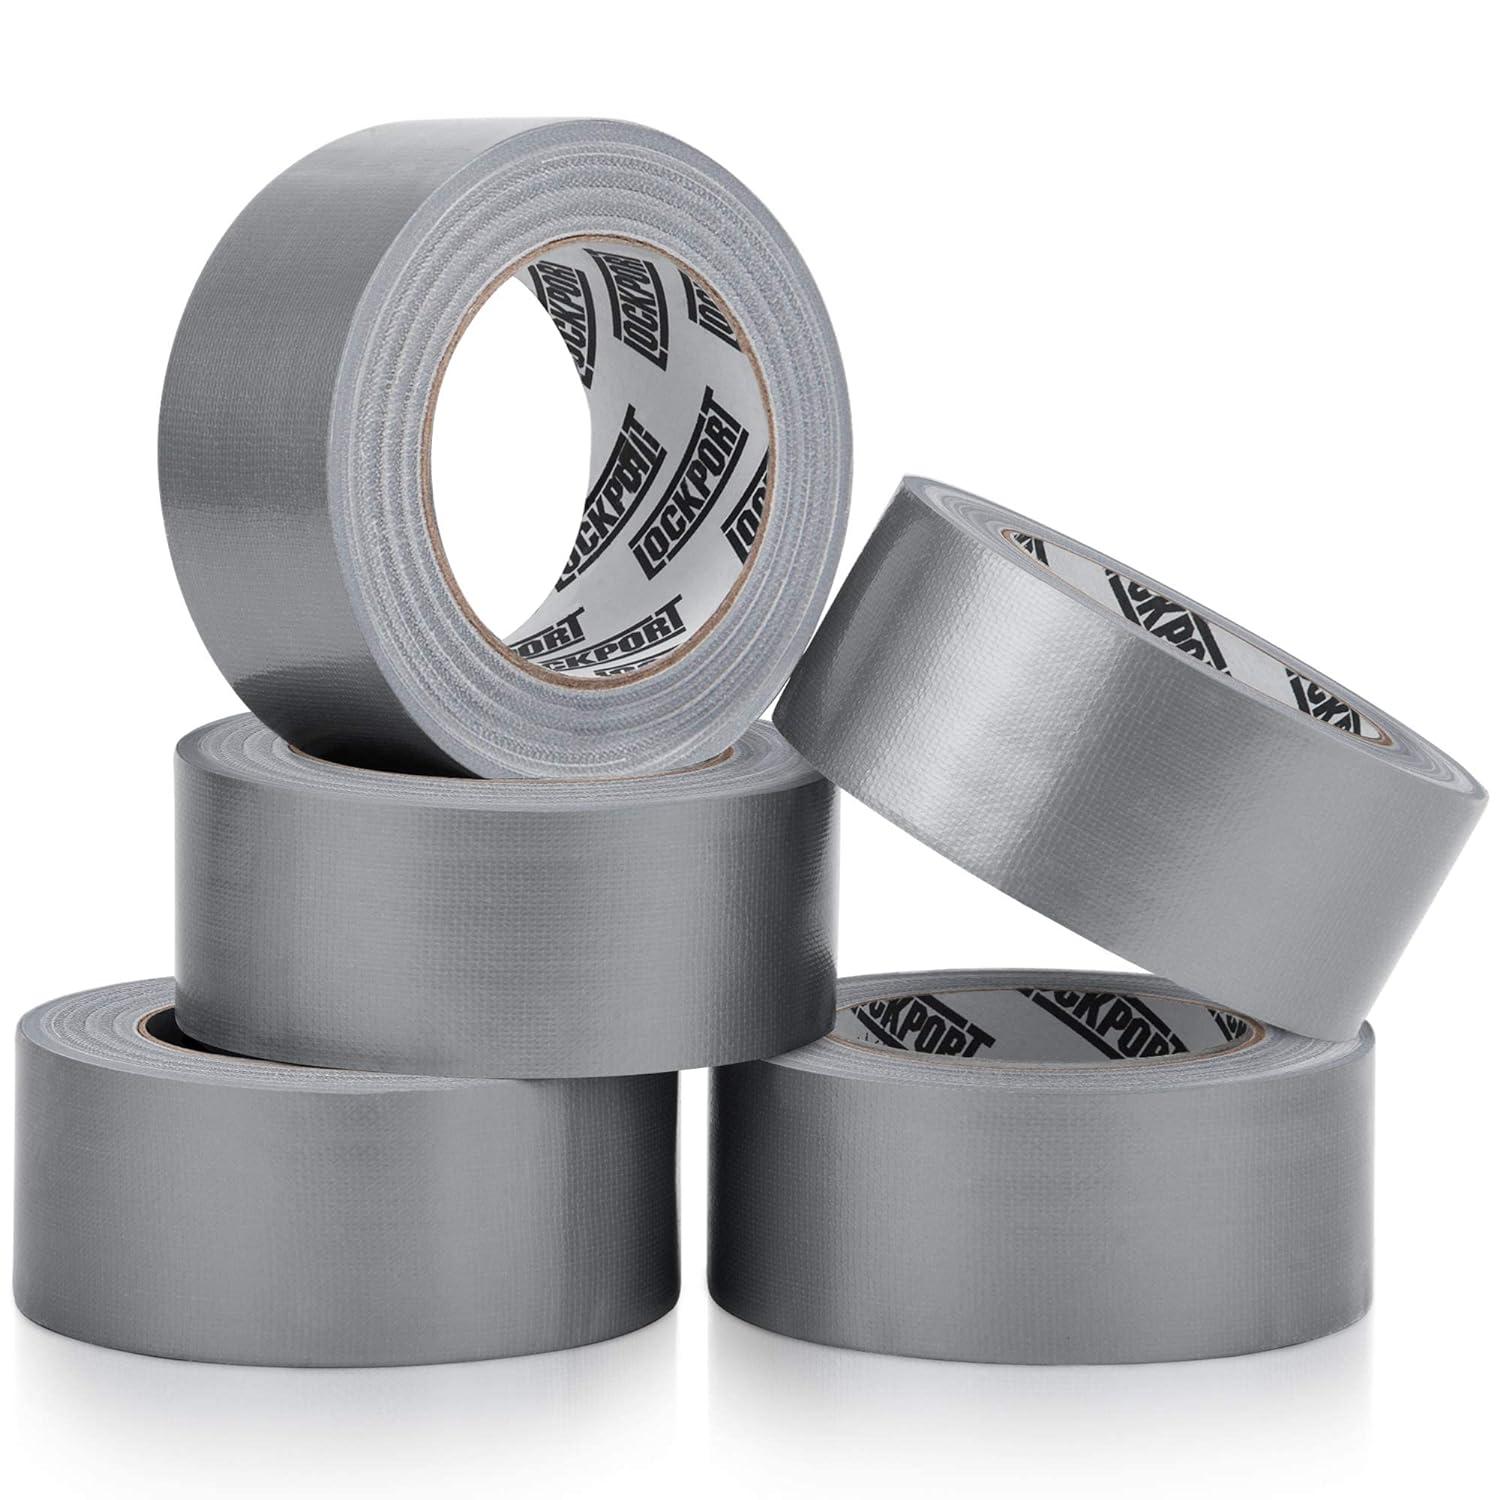 duct tape heavy duty - 5 roll multi pack - silver 90 feet x 2 inch - strong flexible no residue  lockport